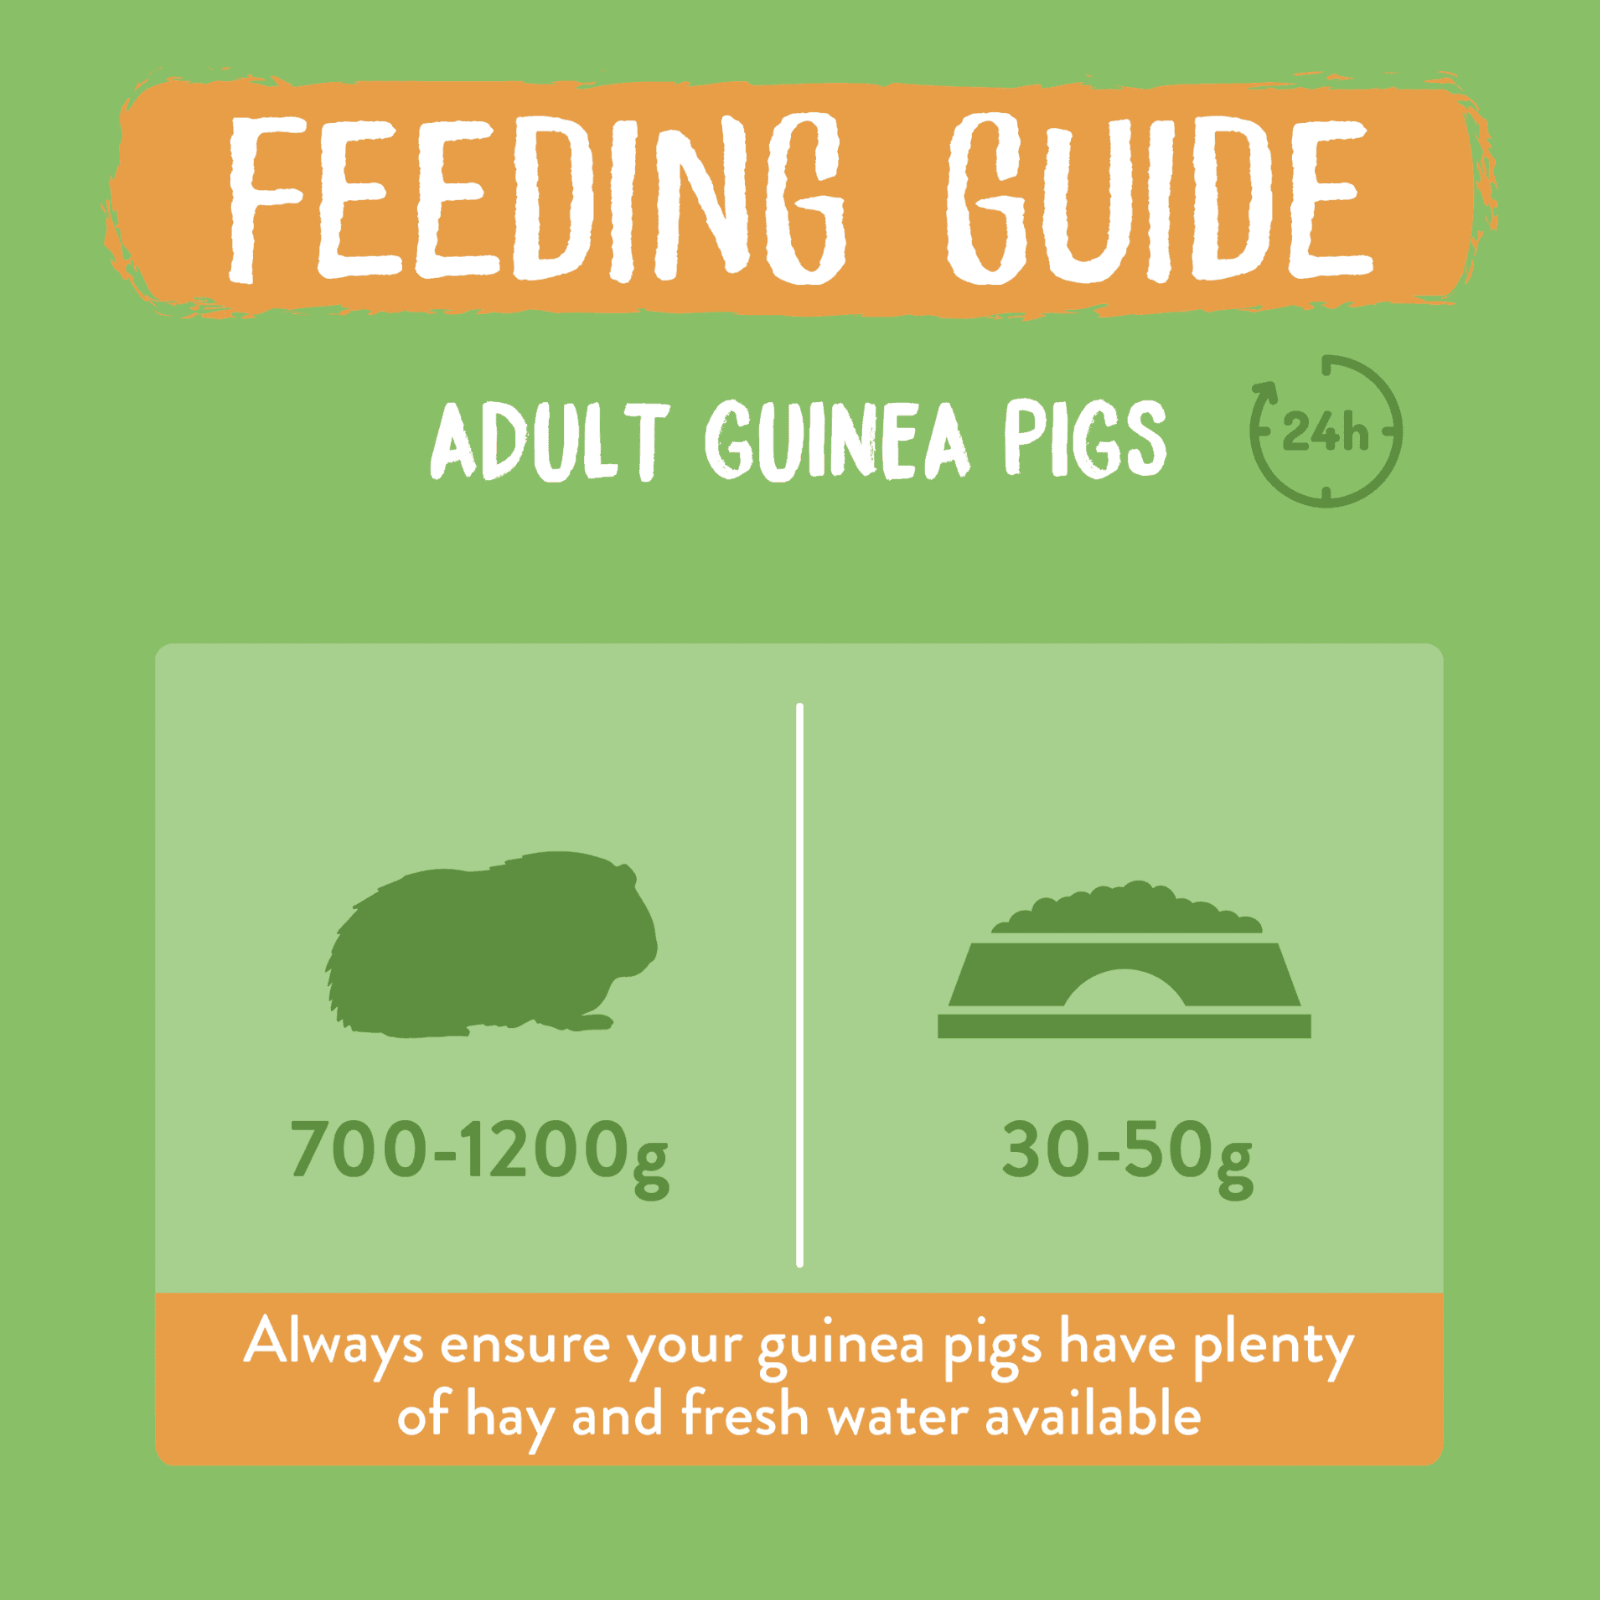 Burgess Excel Guinea Pig Feeding Guide. Adult Guinea Pigs 24hr. 700-1200g Guinea Pig = 30-50g feed. Always ensure your guinea pigs have plenty of hay and fresh water available.